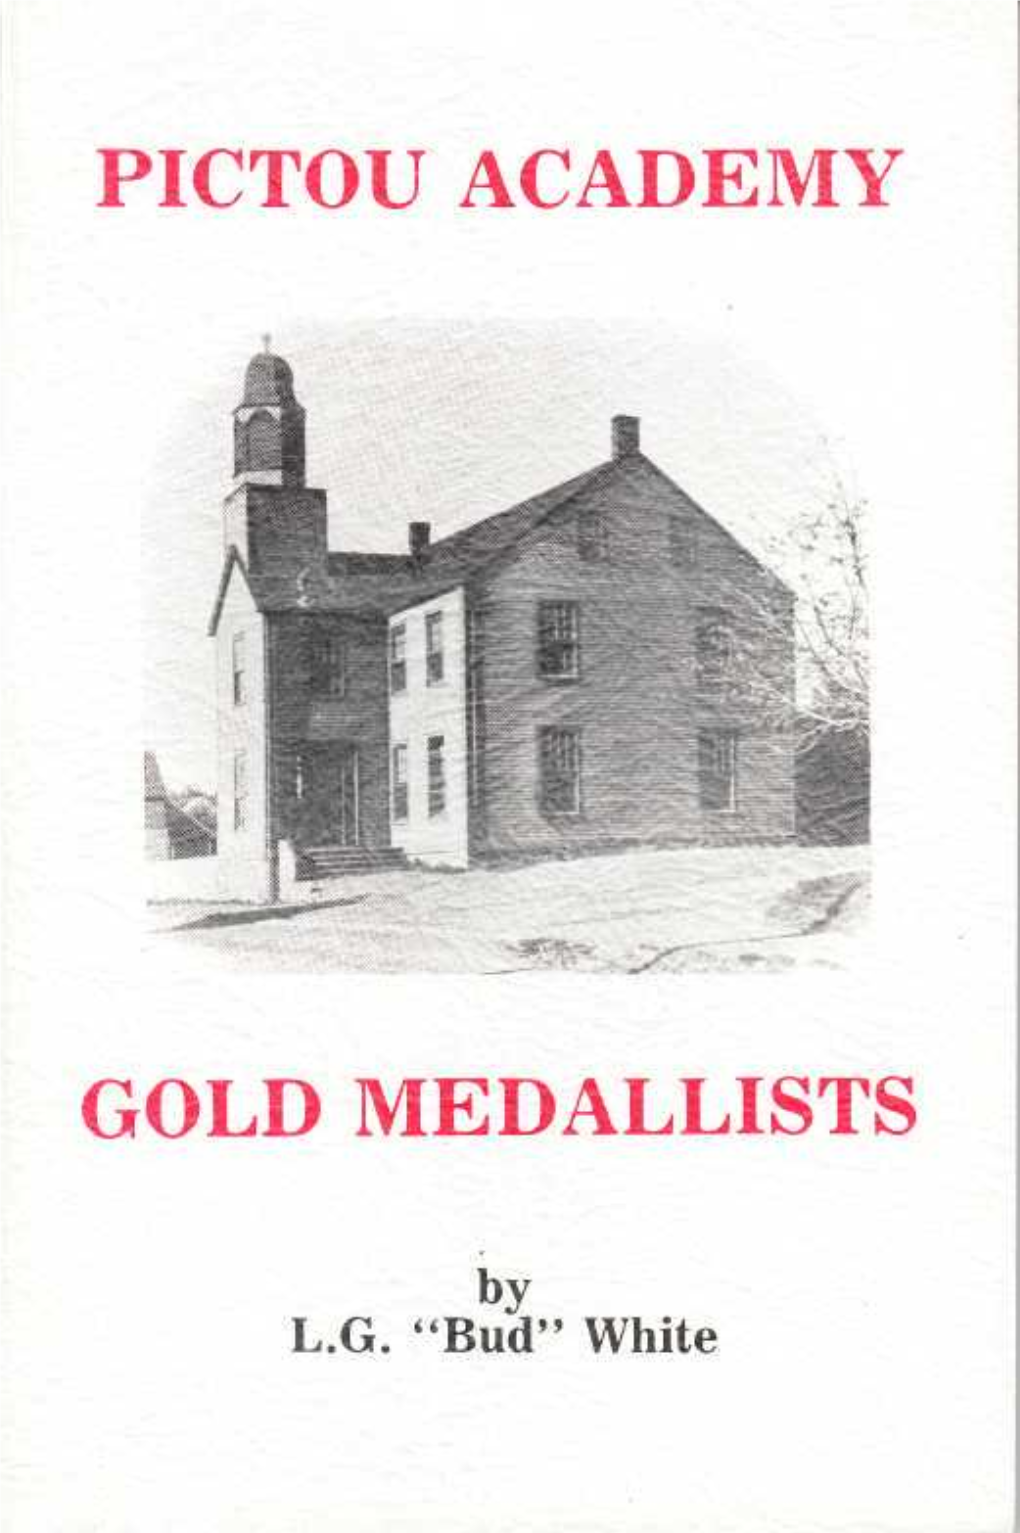 Pictou Academy Gold Medallists Including Biographical Sketches of One Hundred Eleven Recipients and Other Brief Notes